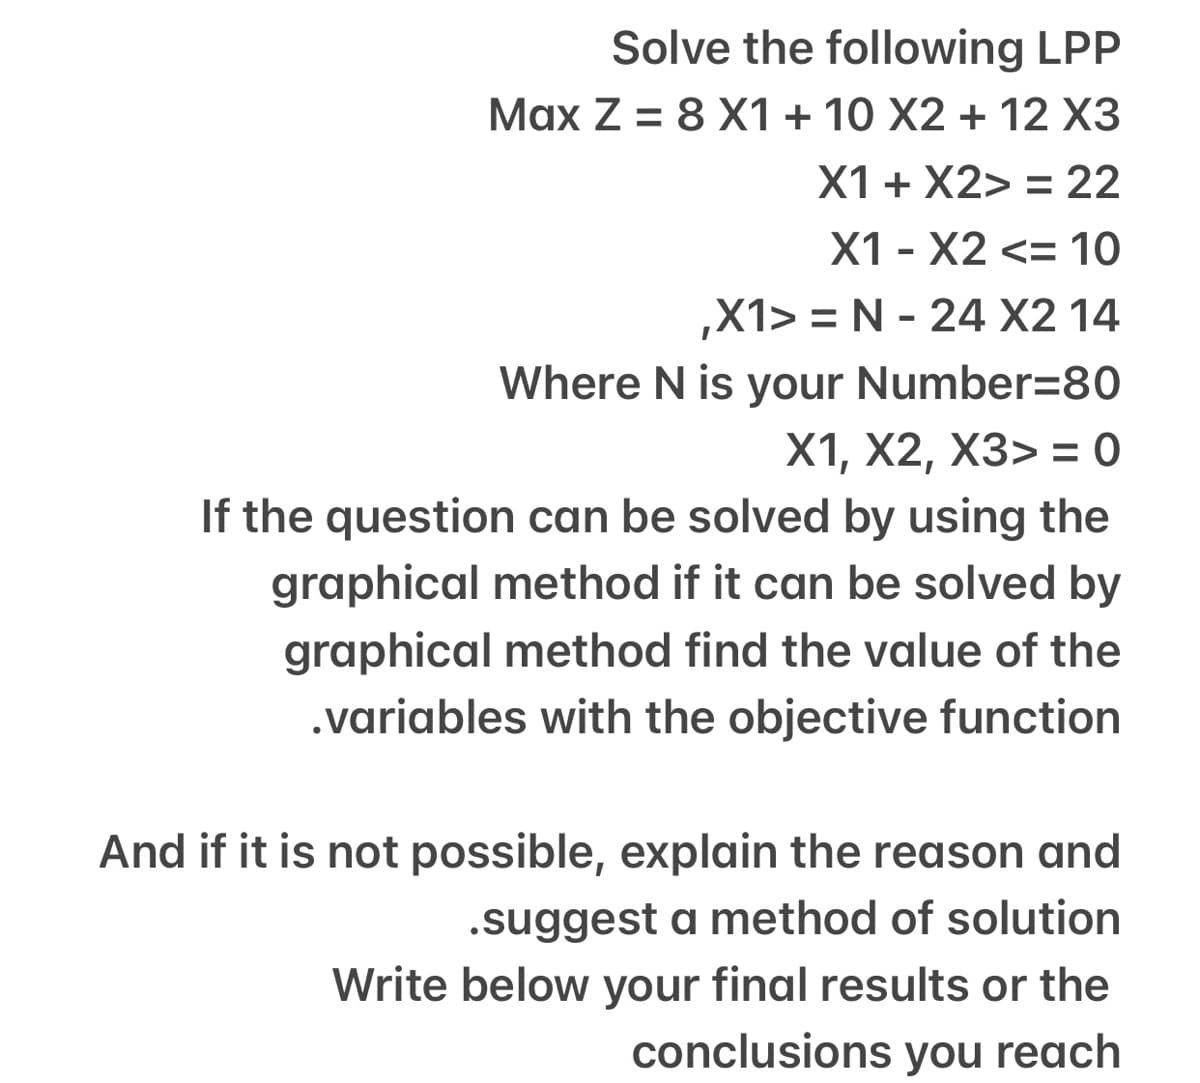 Solve the following LPP
Max Z = 8 X1 + 10 X2 + 12 X3
X1 + X2> = 22
X1 - X2 <= 10
,X1> = N - 24 X2 14
Where N is your Number=80
X1, X2, X3> = 0
If the question can be solved by using the
graphical method if it can be solved by
graphical method find the value of the
.variables with the objective function
And if it is not possible, explain the reason and
.suggest a method of solution
Write below your final results or the
conclusions you reach
